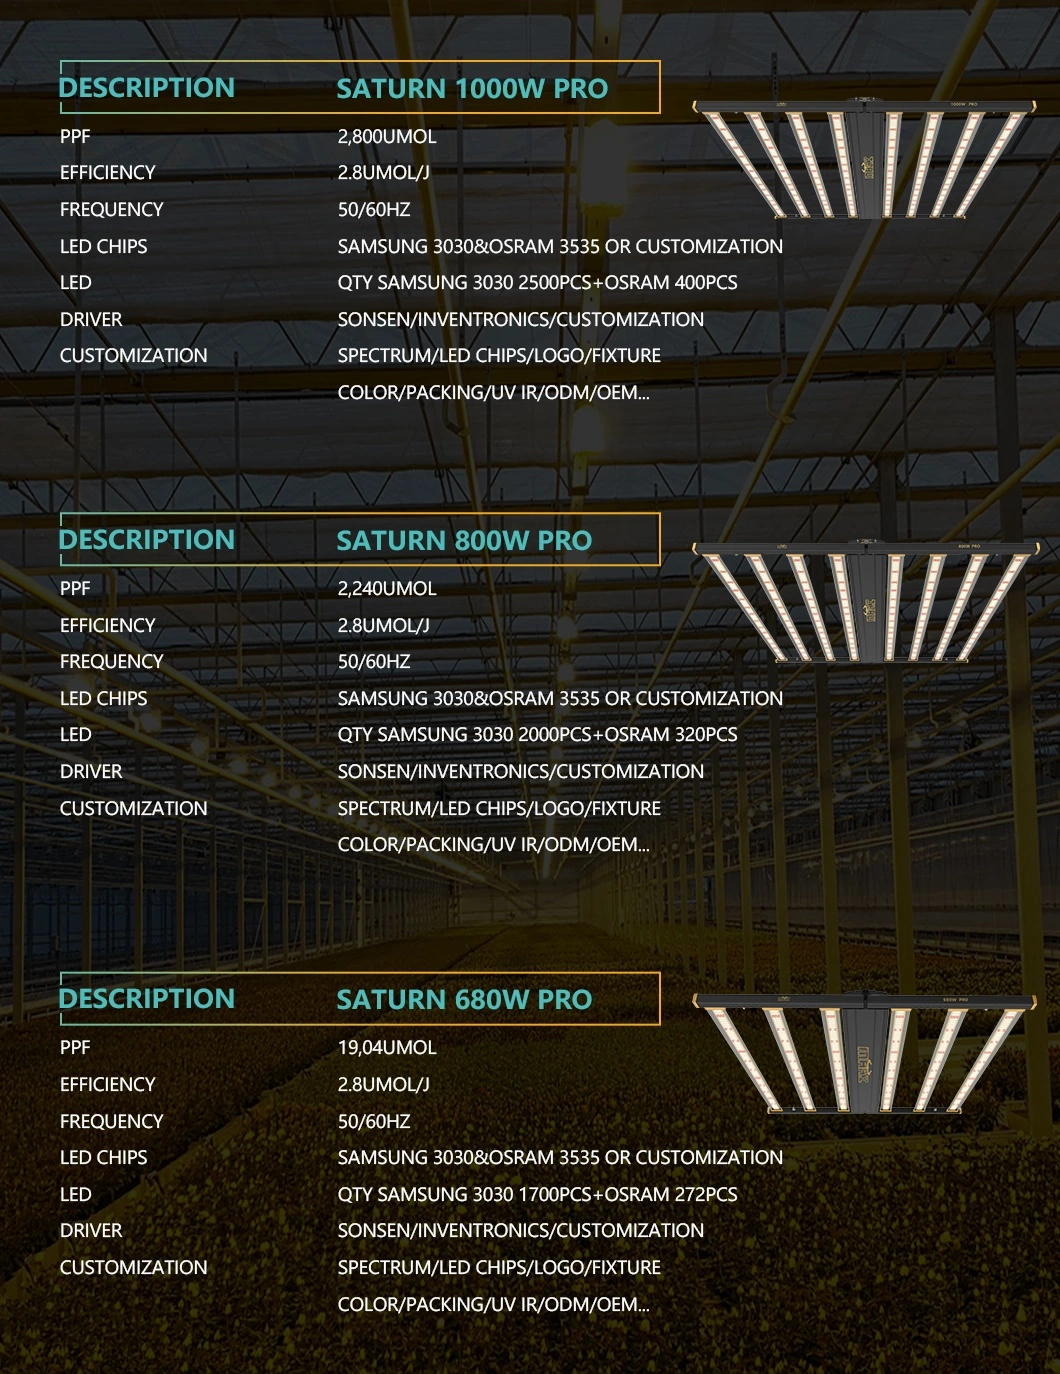 Ulight Horticulture Interlighting Best 100W LED Grow Light for Greenhouse